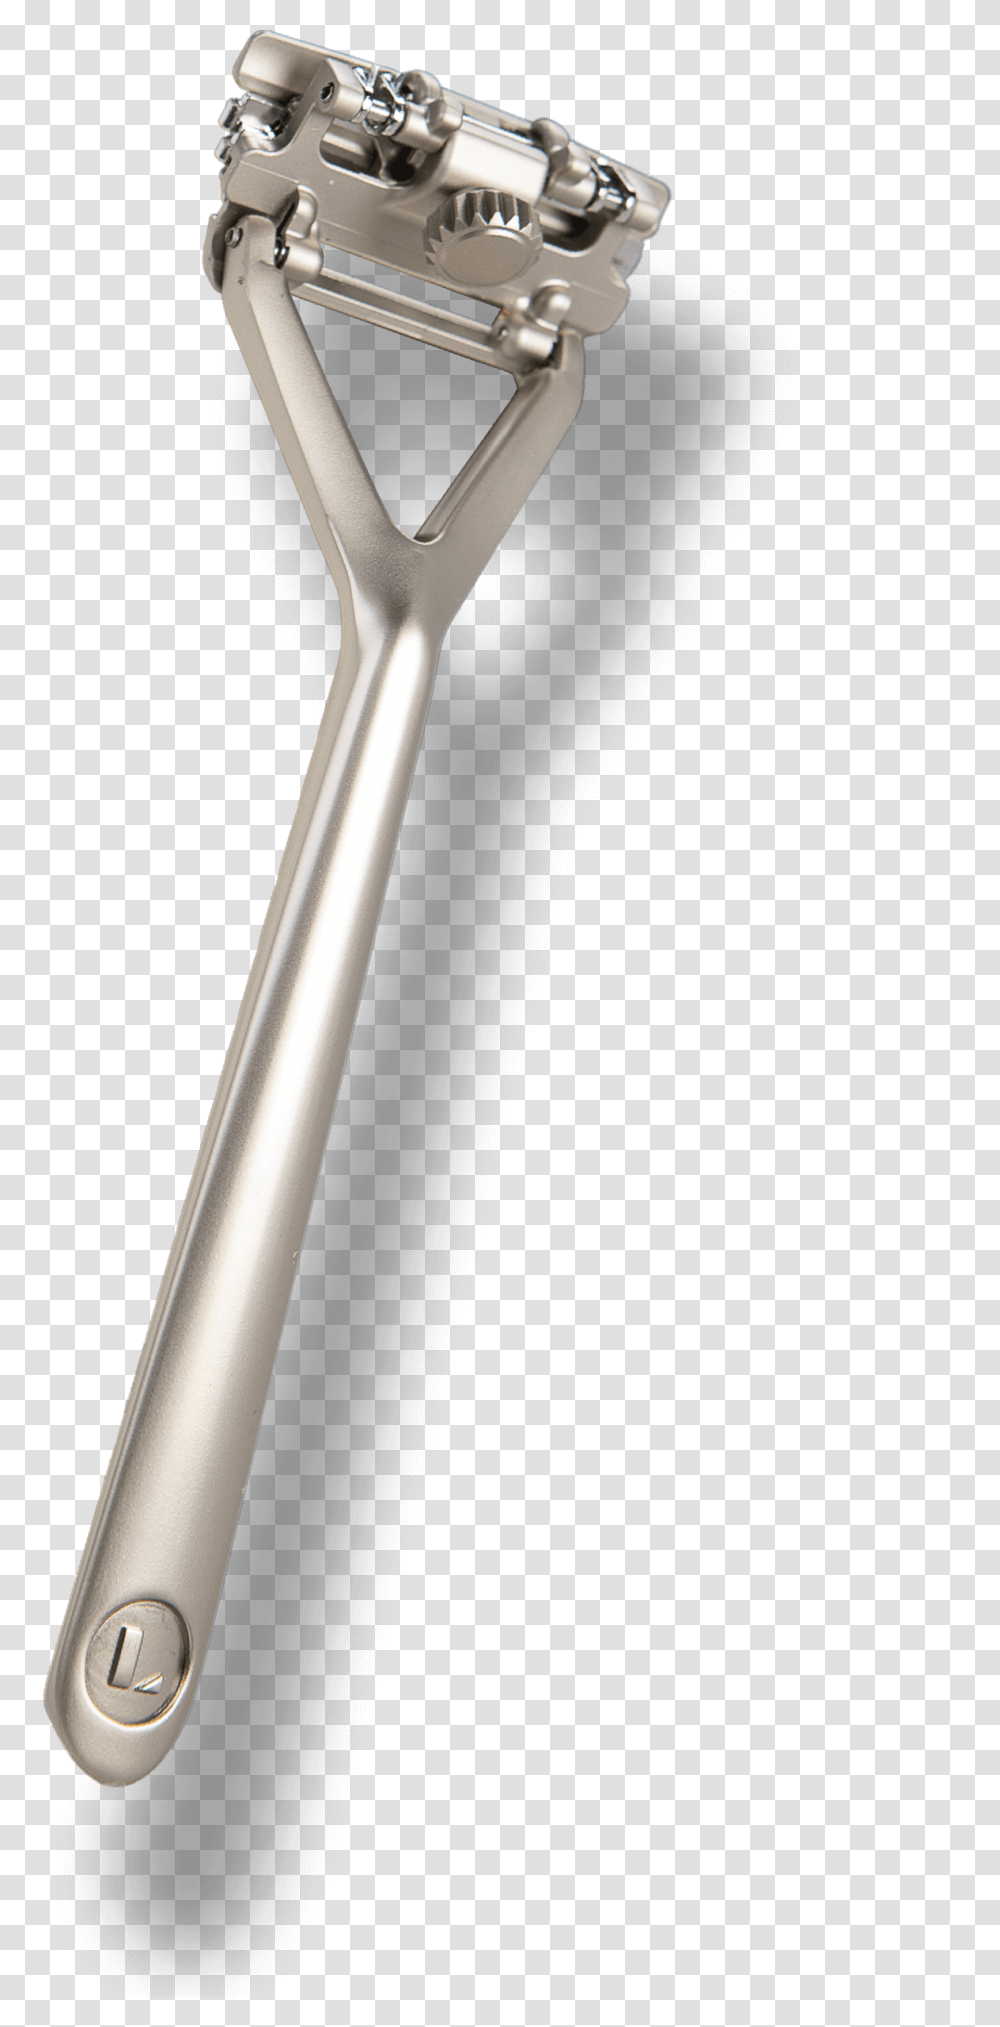 Gillette Razor, Cutlery, Spoon, Fork, Wrench Transparent Png